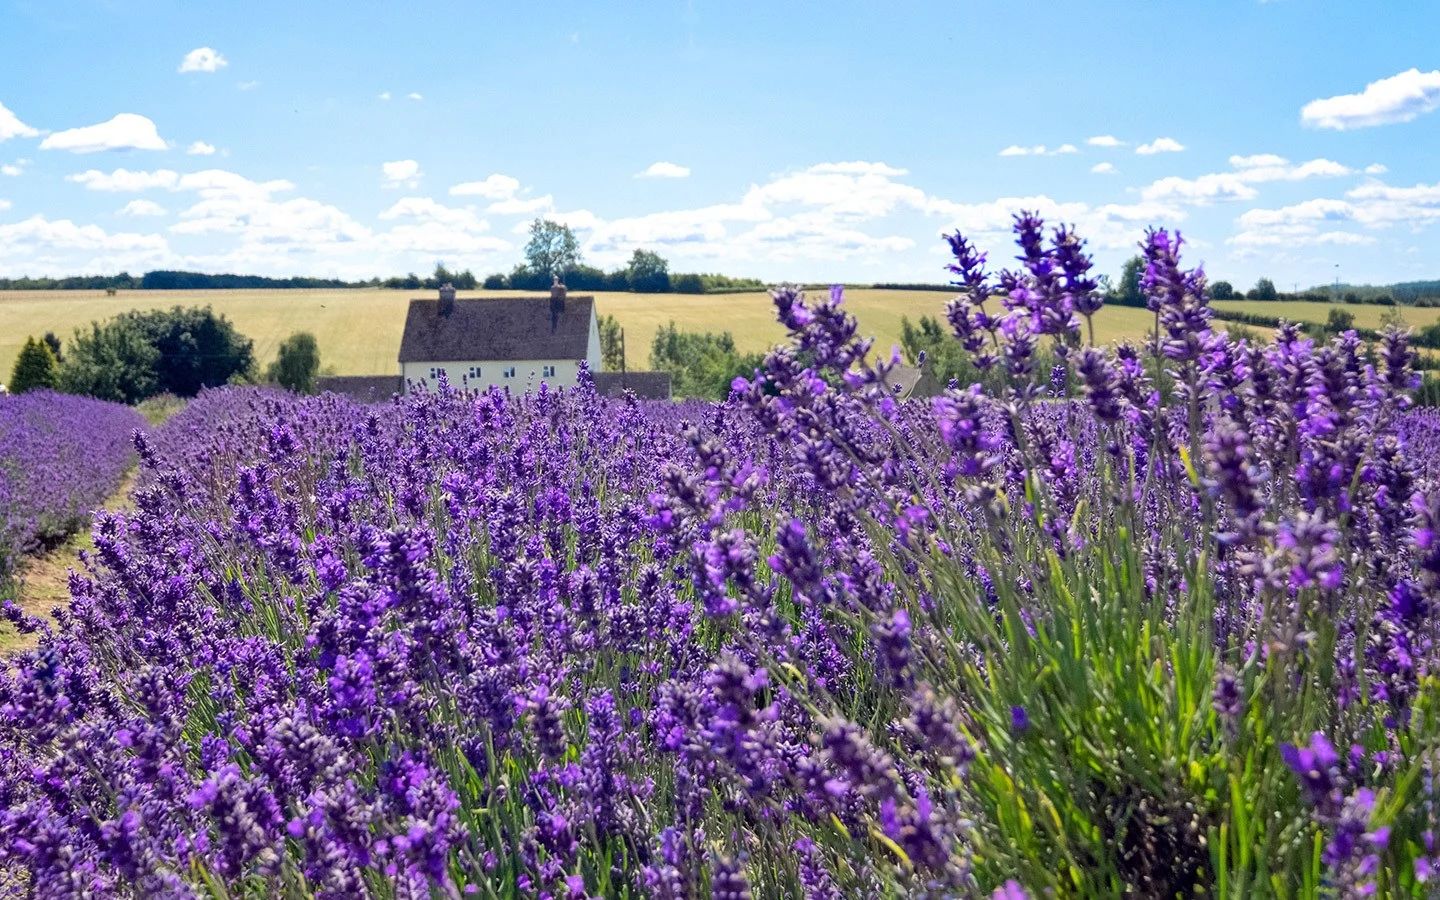 The Cotswold Lavender fields